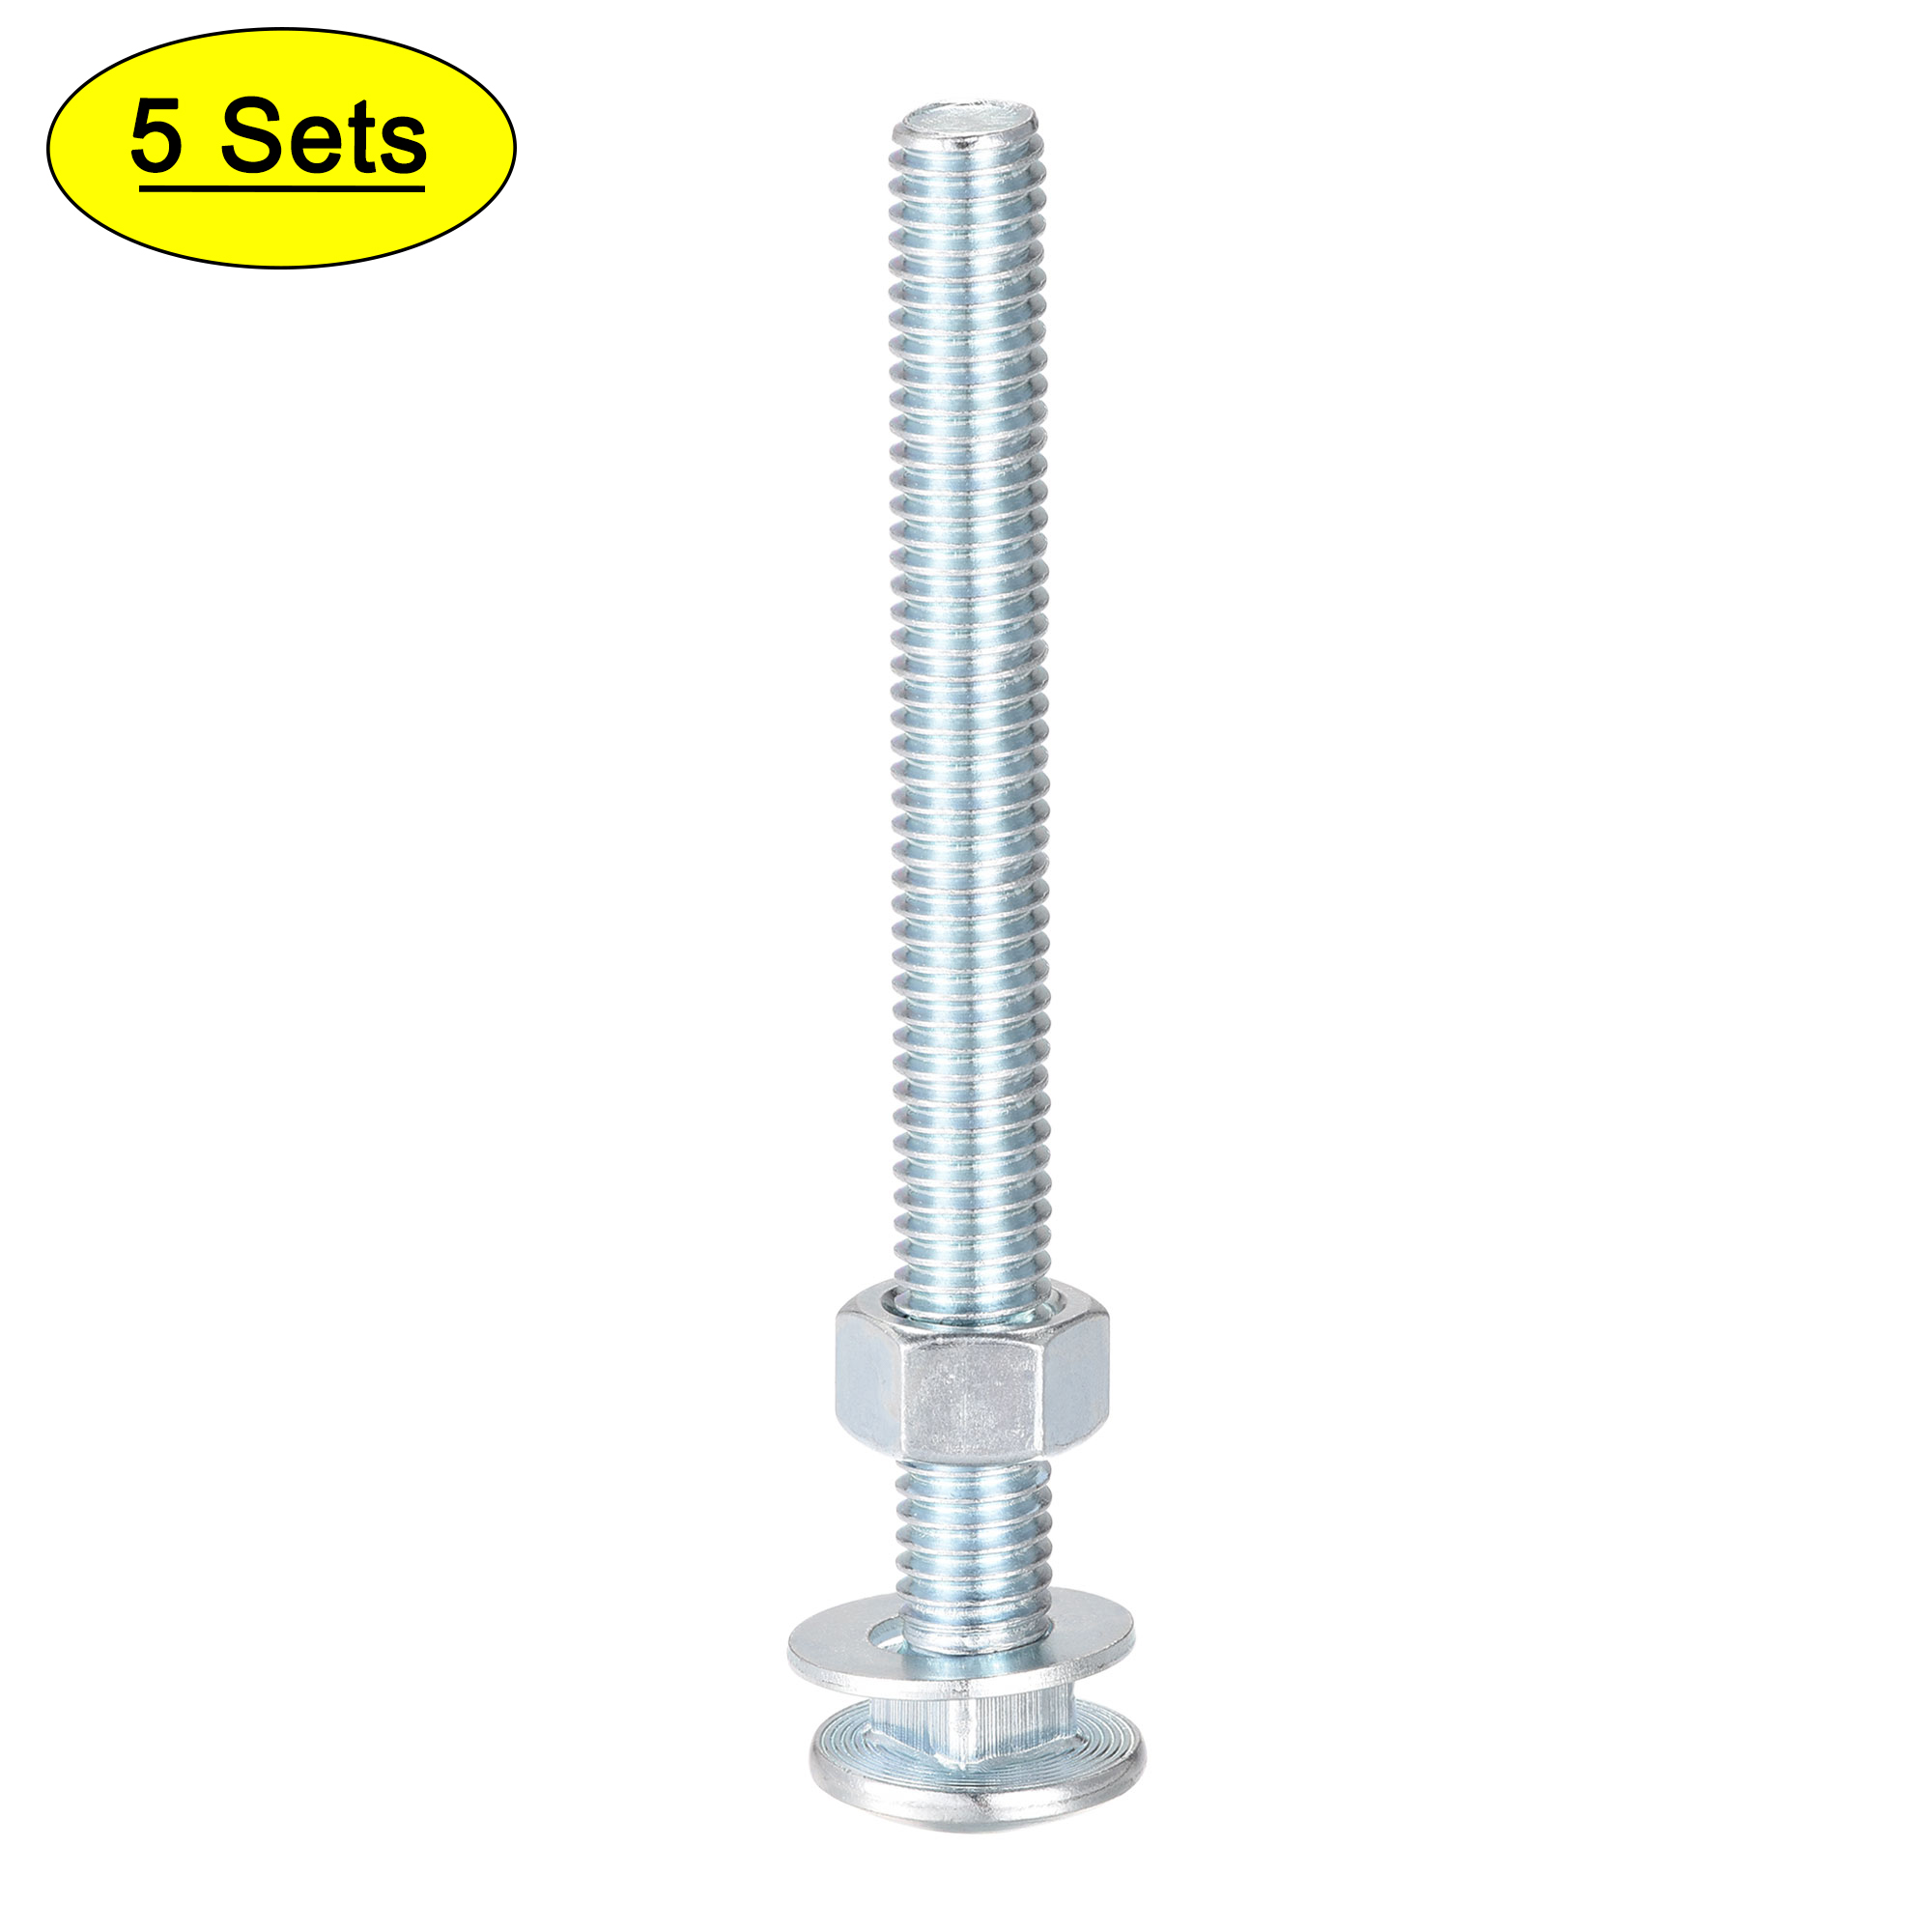 Uxcell 3/8-16 x 4" Carbon Steel Square Neck Carriage Bolts with Nuts & Washers 5 Set - image 1 of 5